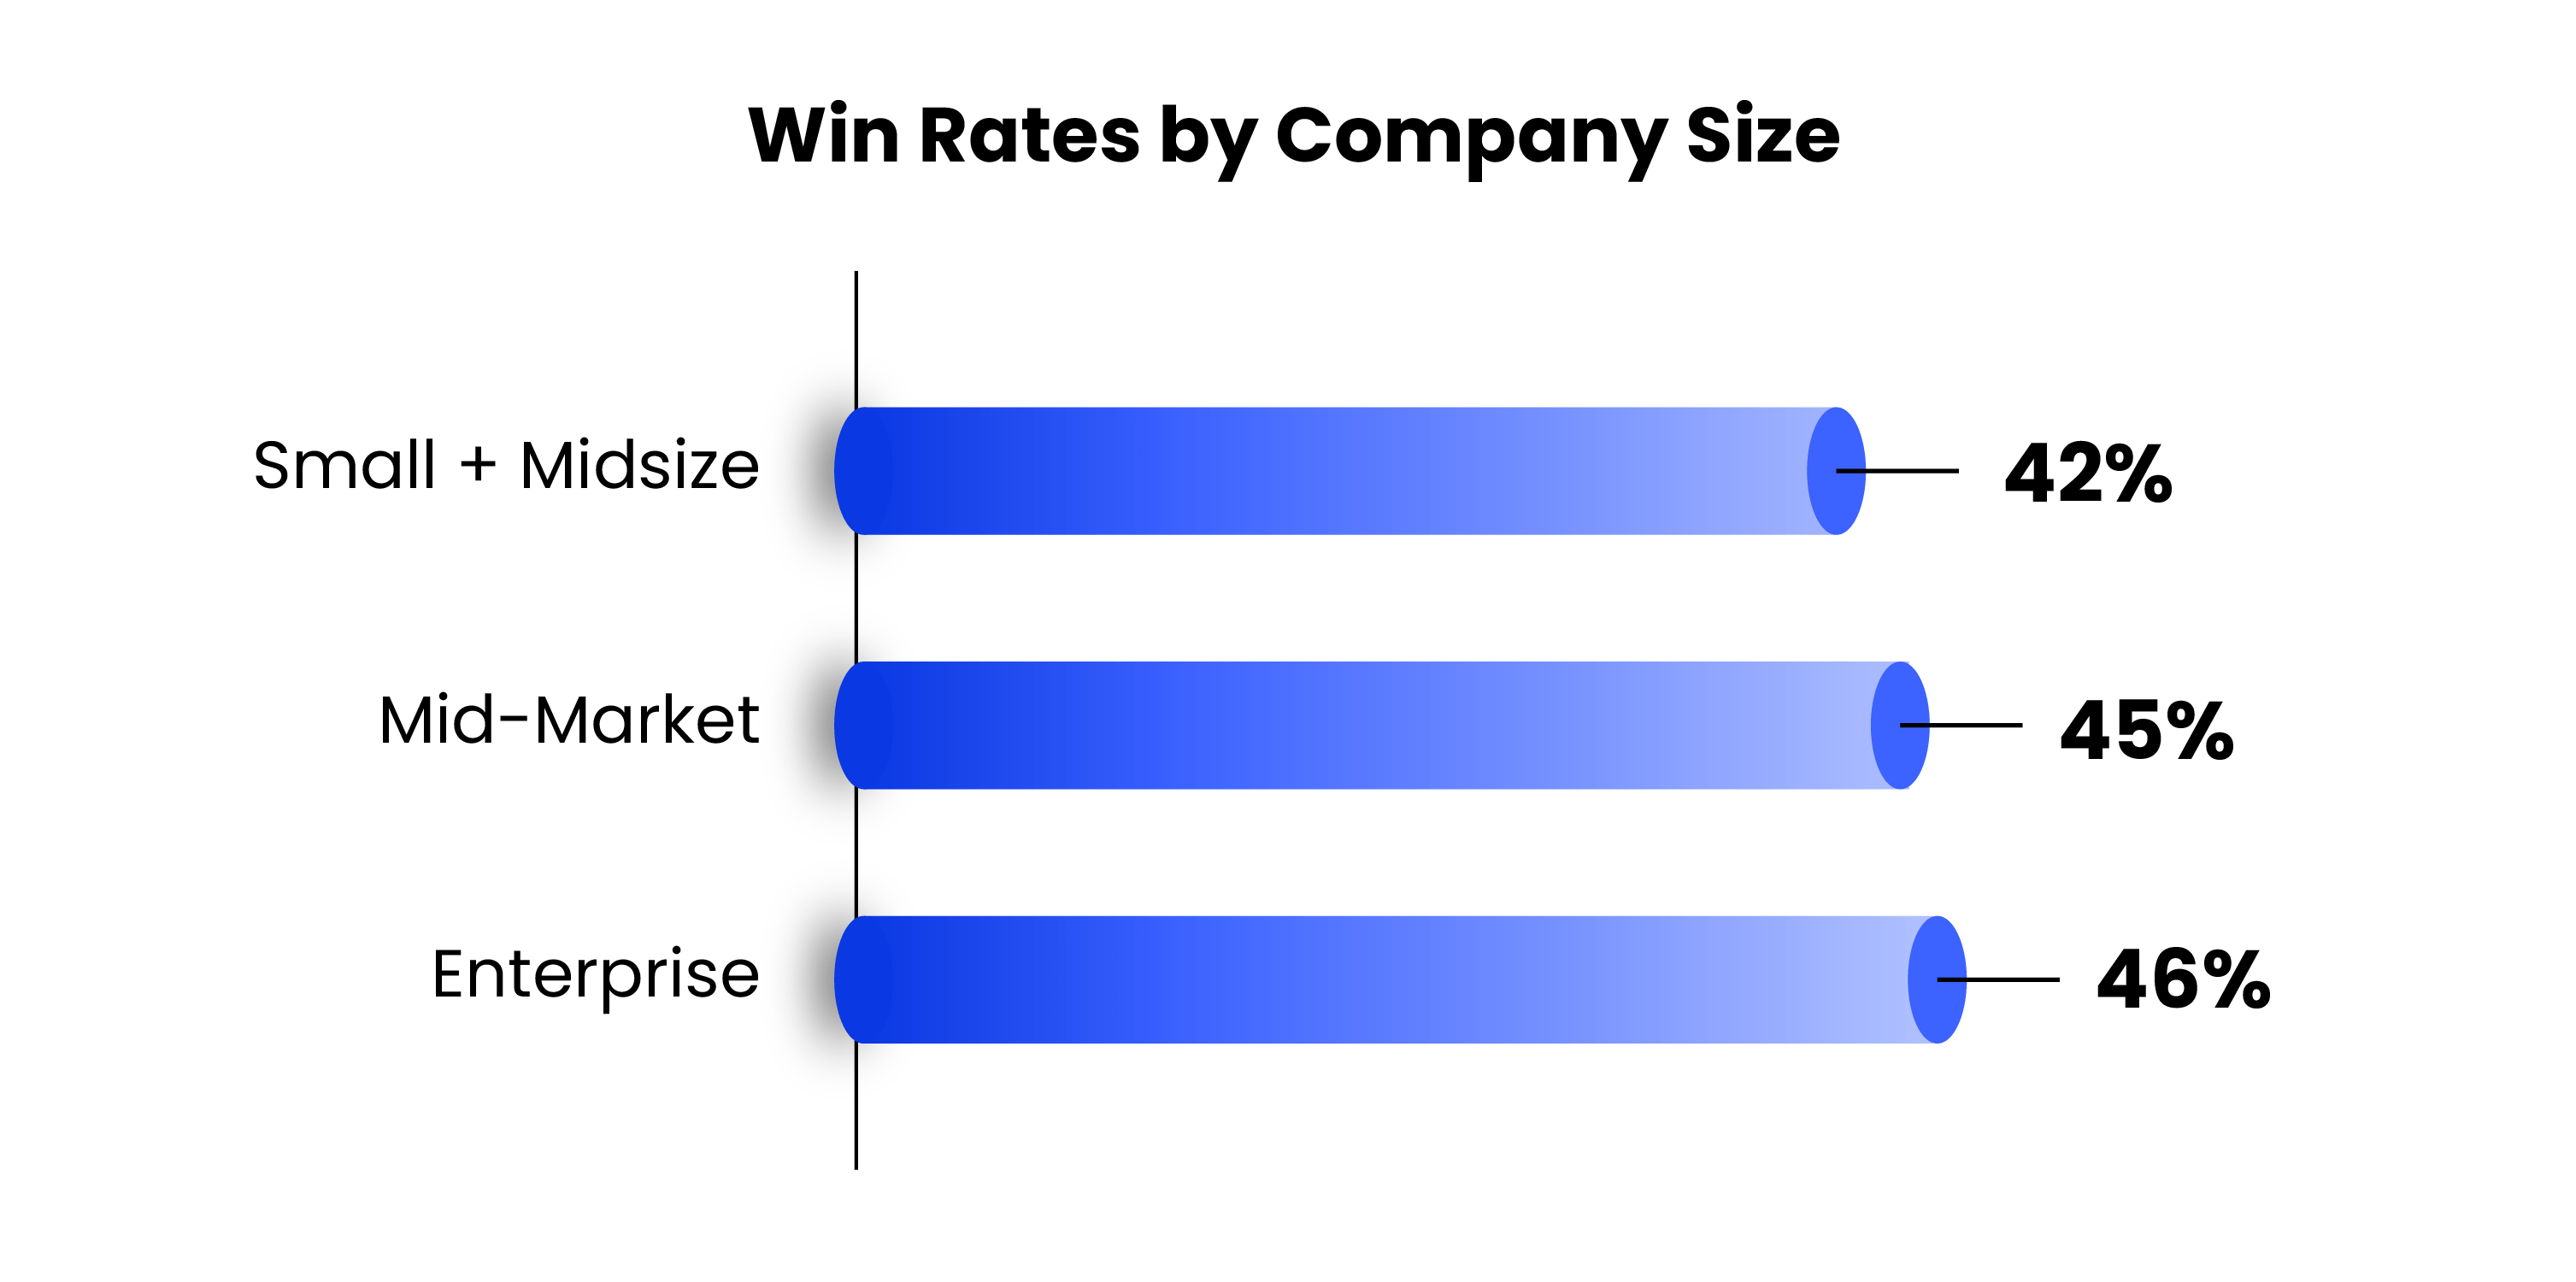 Win rate by company size. Small and midsize at 42%. Mid-market at 45%. Enterprise at 46%.